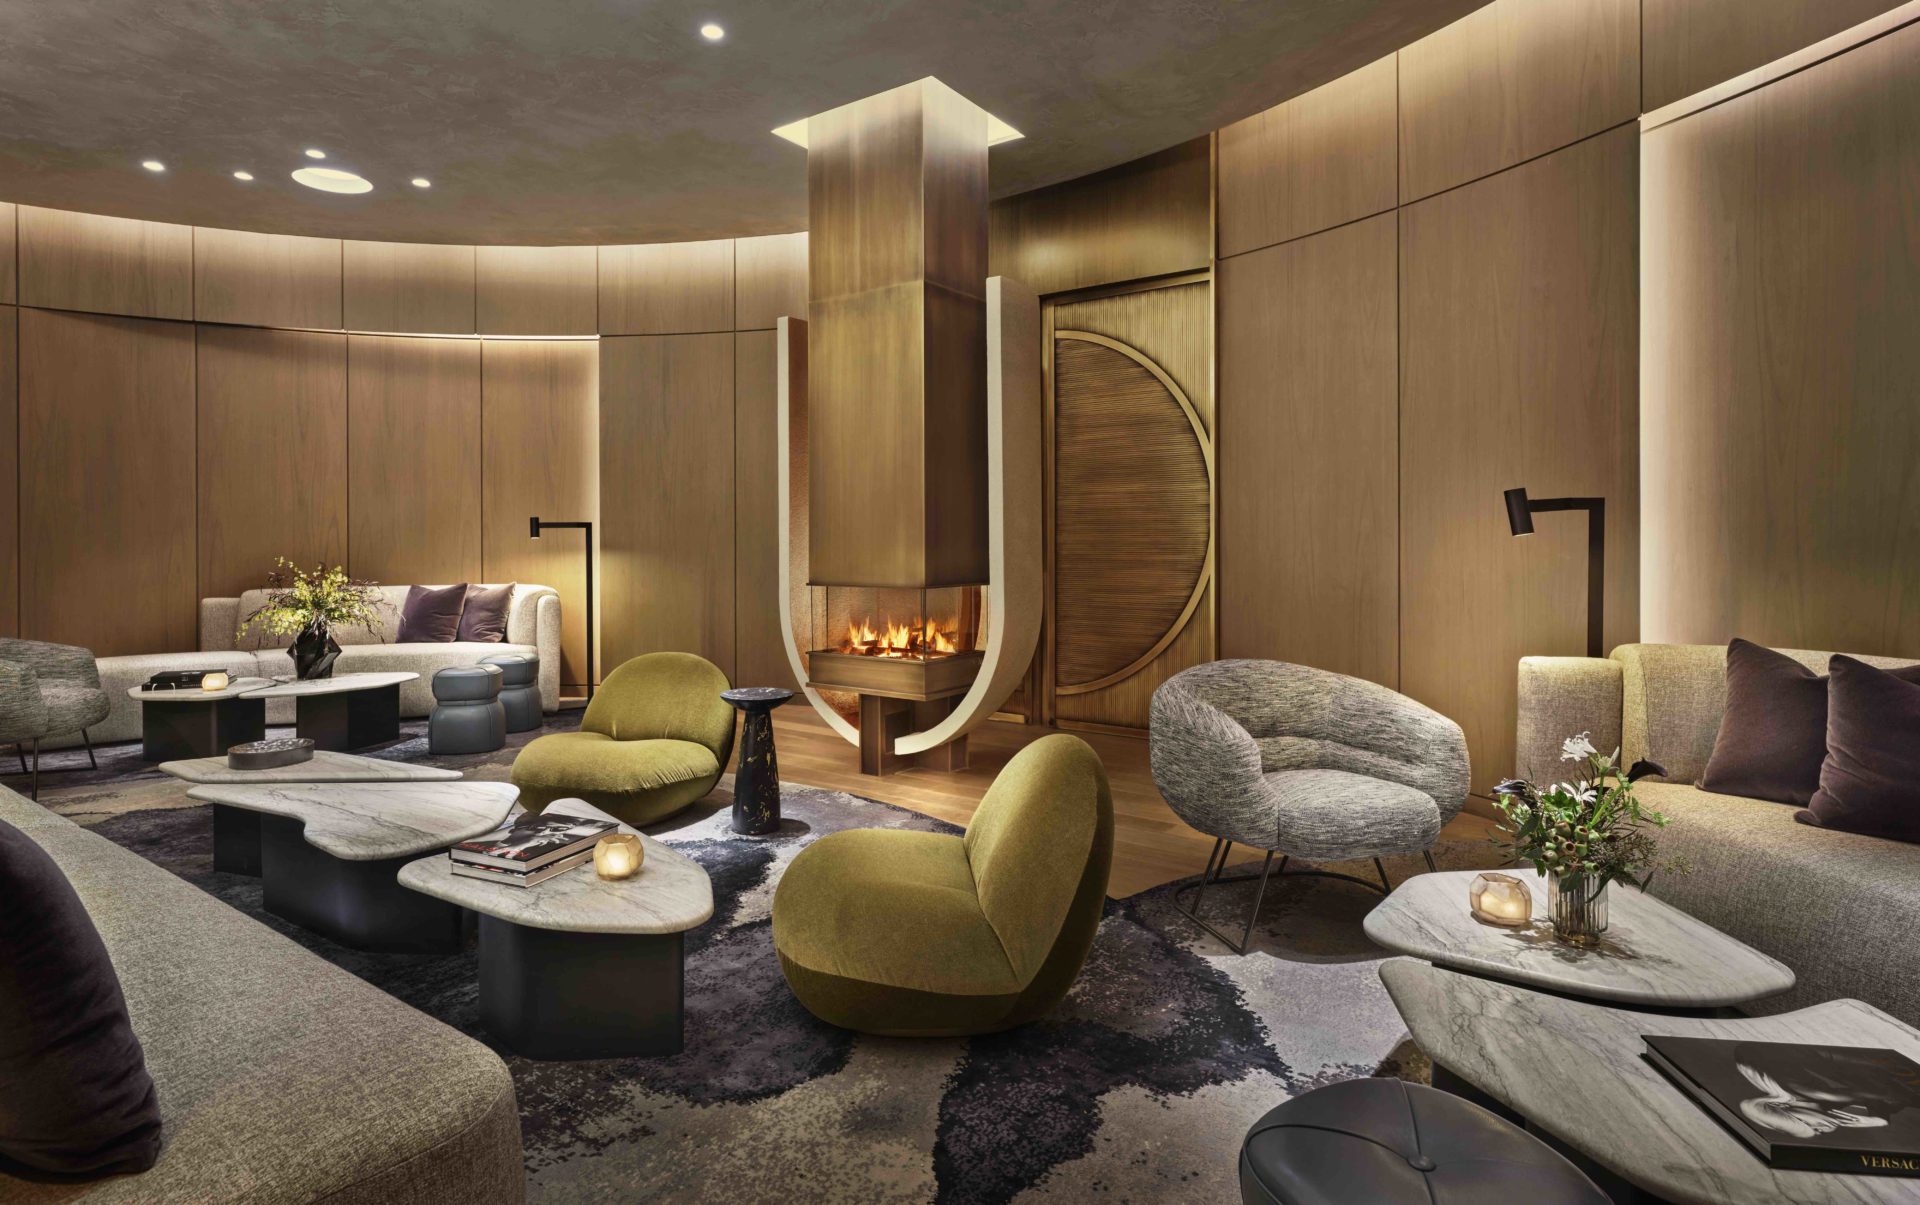 Club Level amenities designed by Rockwell Group for New York's iconic 550 Madison Avenue